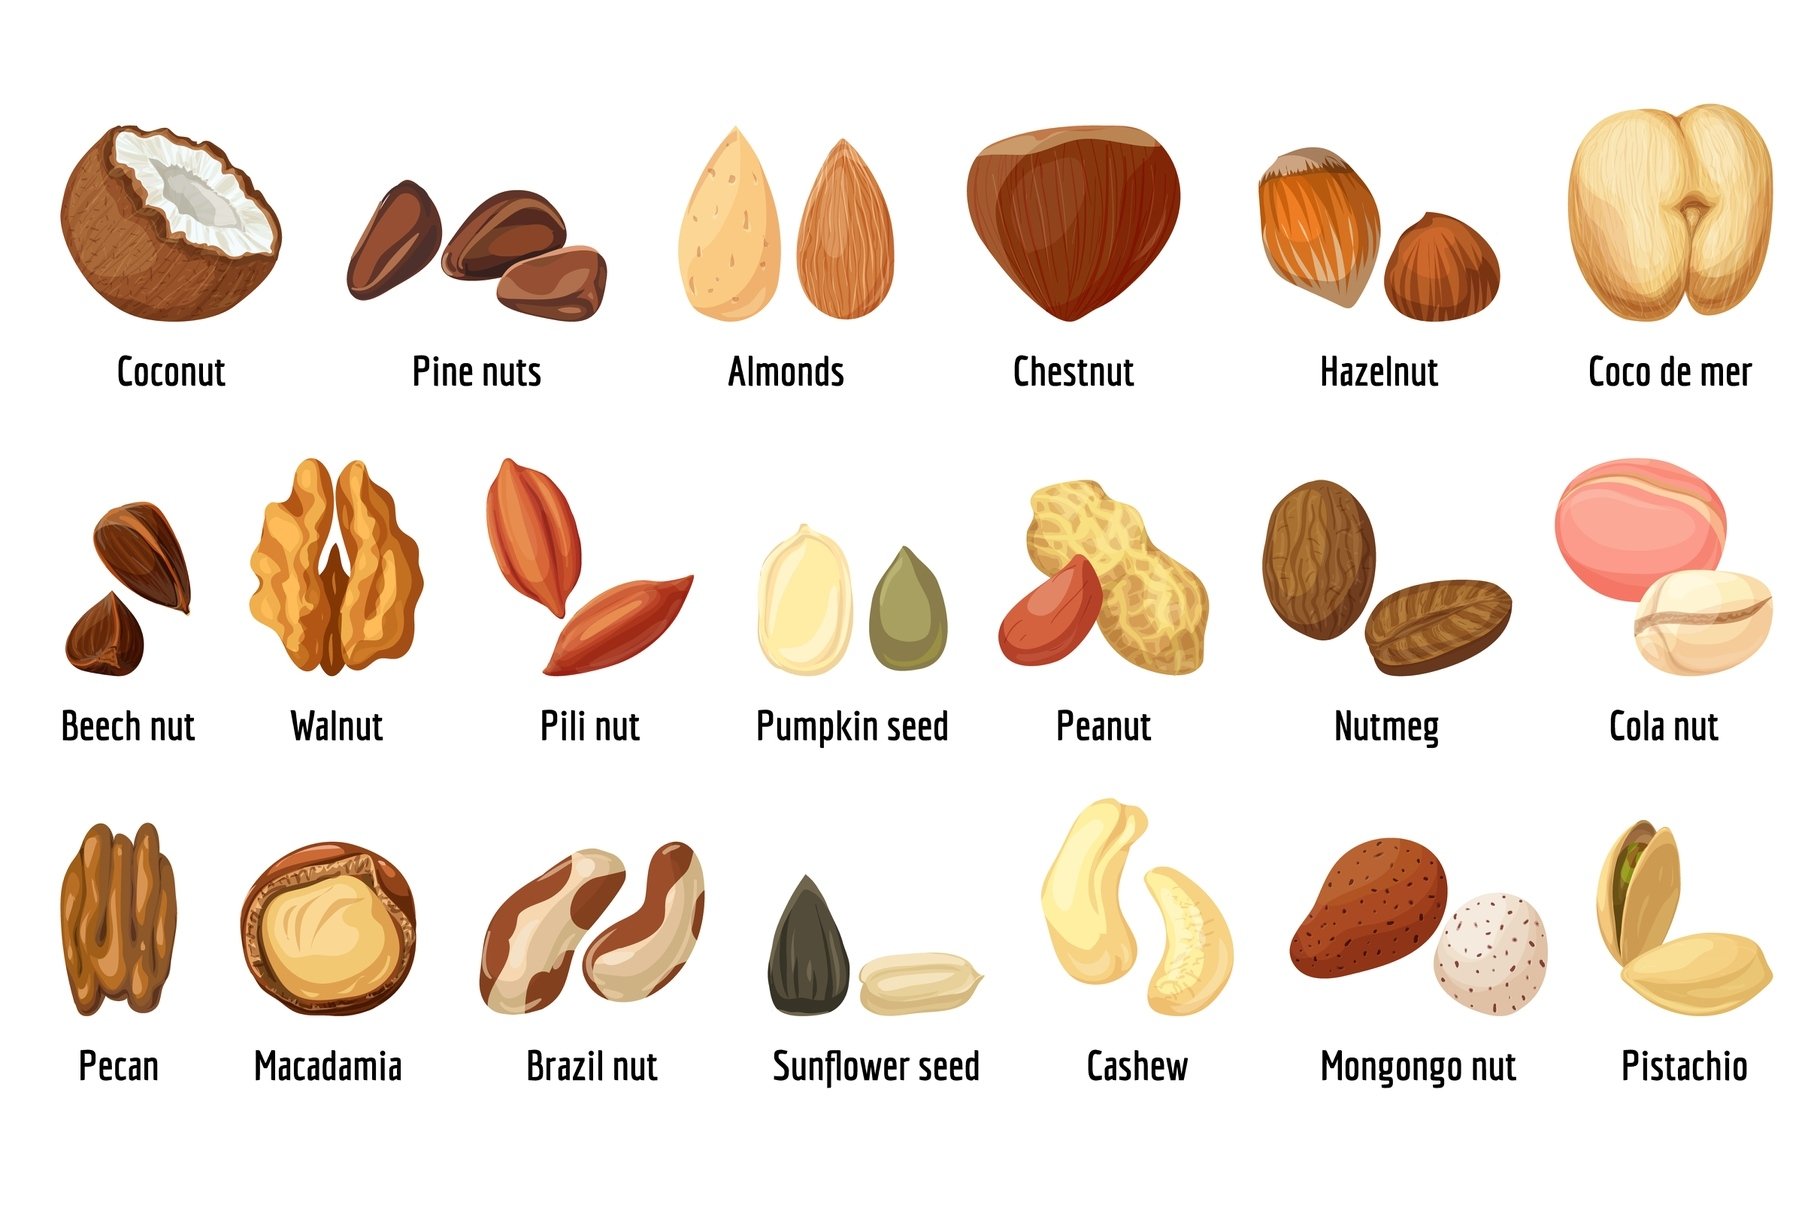 Big nuts collection in a high quality.